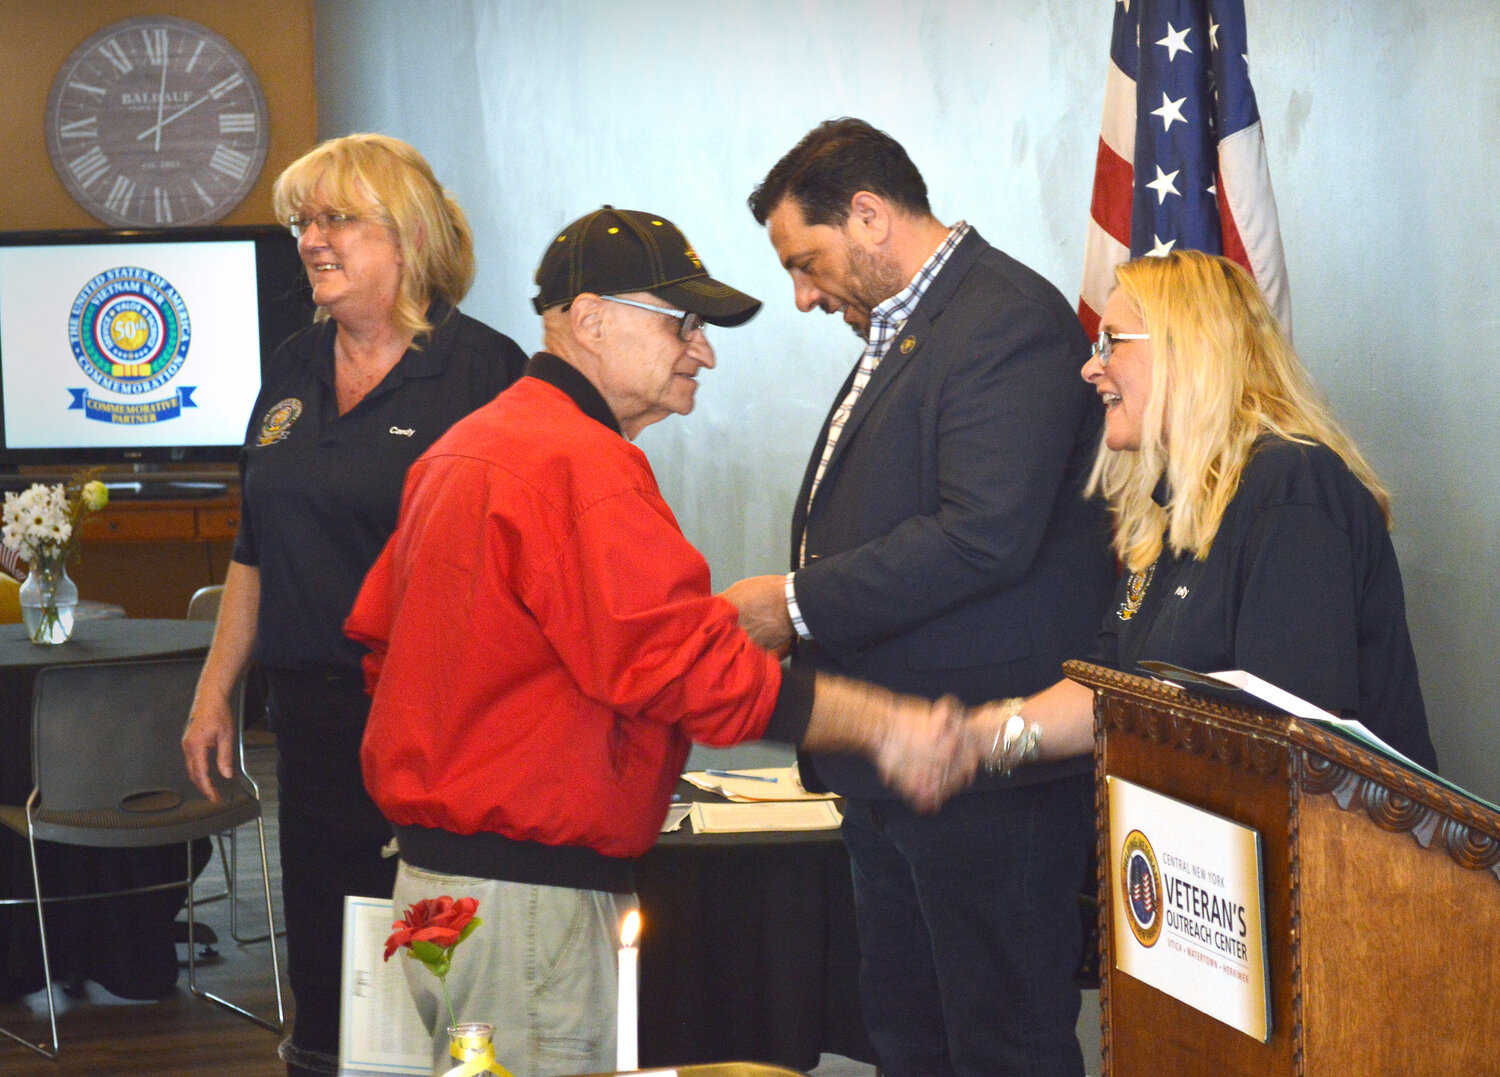 Vietnam veteran Nick LaBella, Utica, shakes hands with Kelly Walters, executive director 50 Forward Mohawk Valley after receiving his Commemoration Pin during the National Vietnam Veterans War Day, March 29, at the Central New York Veterans Outreach Center in Utica.